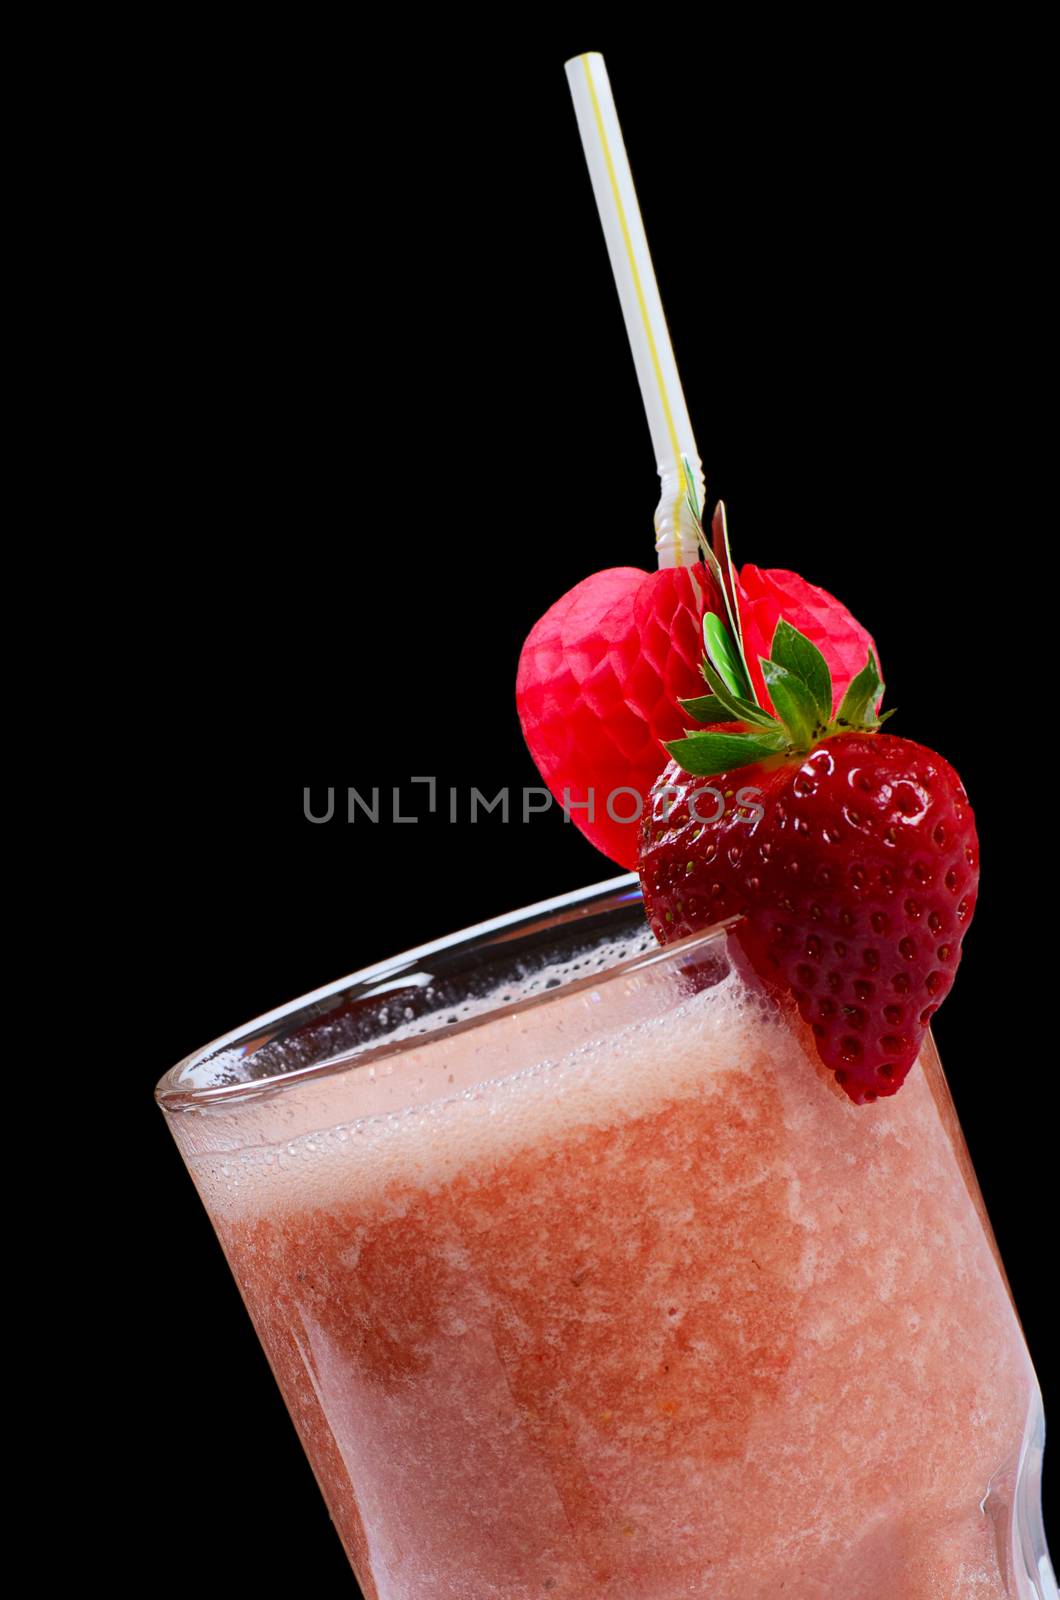 The strawberry smoothie on a black background